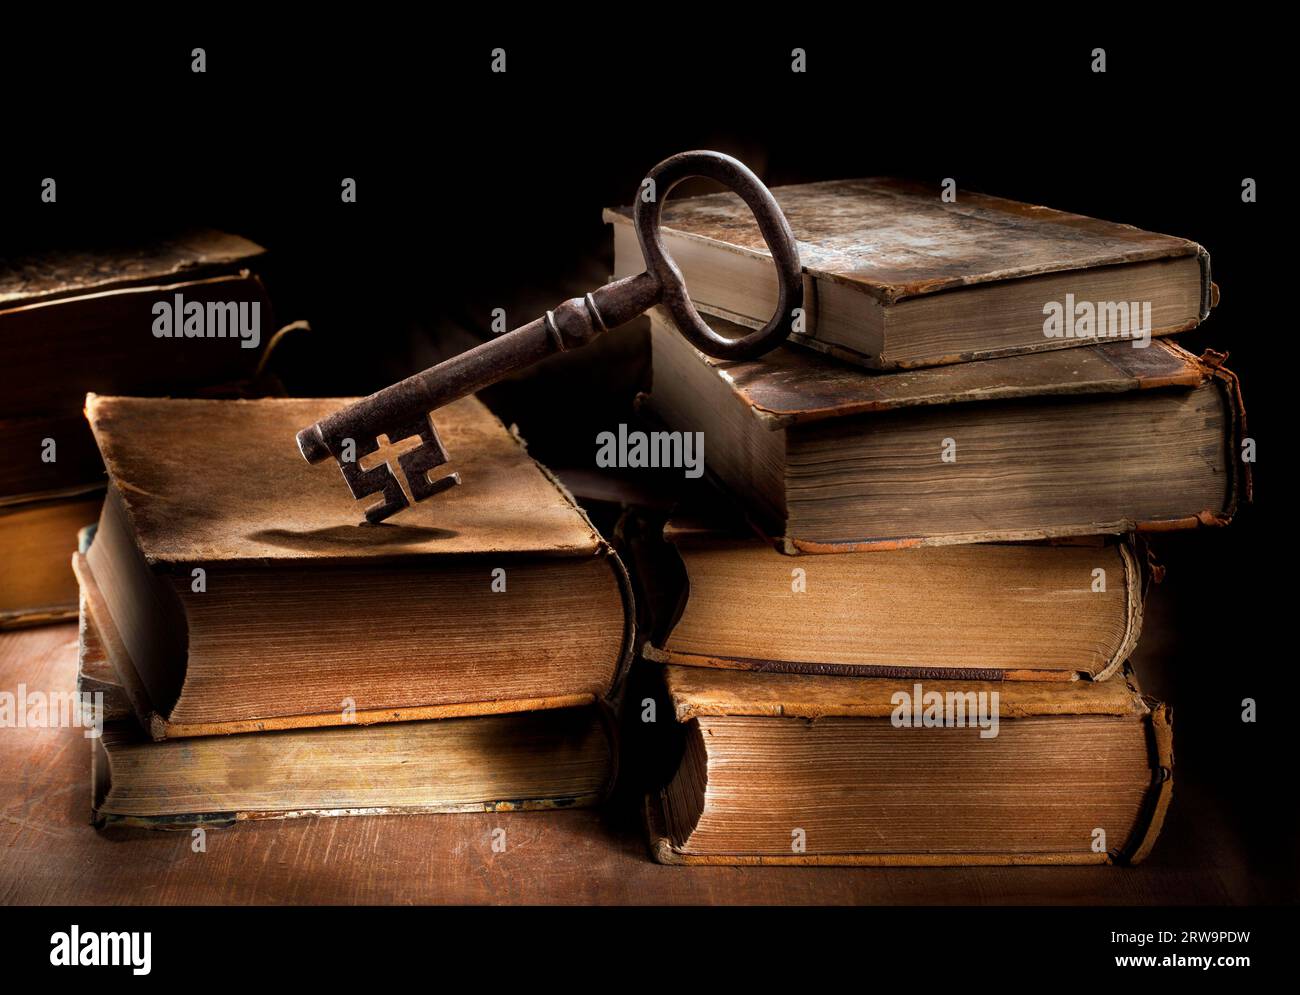 Conceptual still life image of old antique books and a big old key Stock Photo